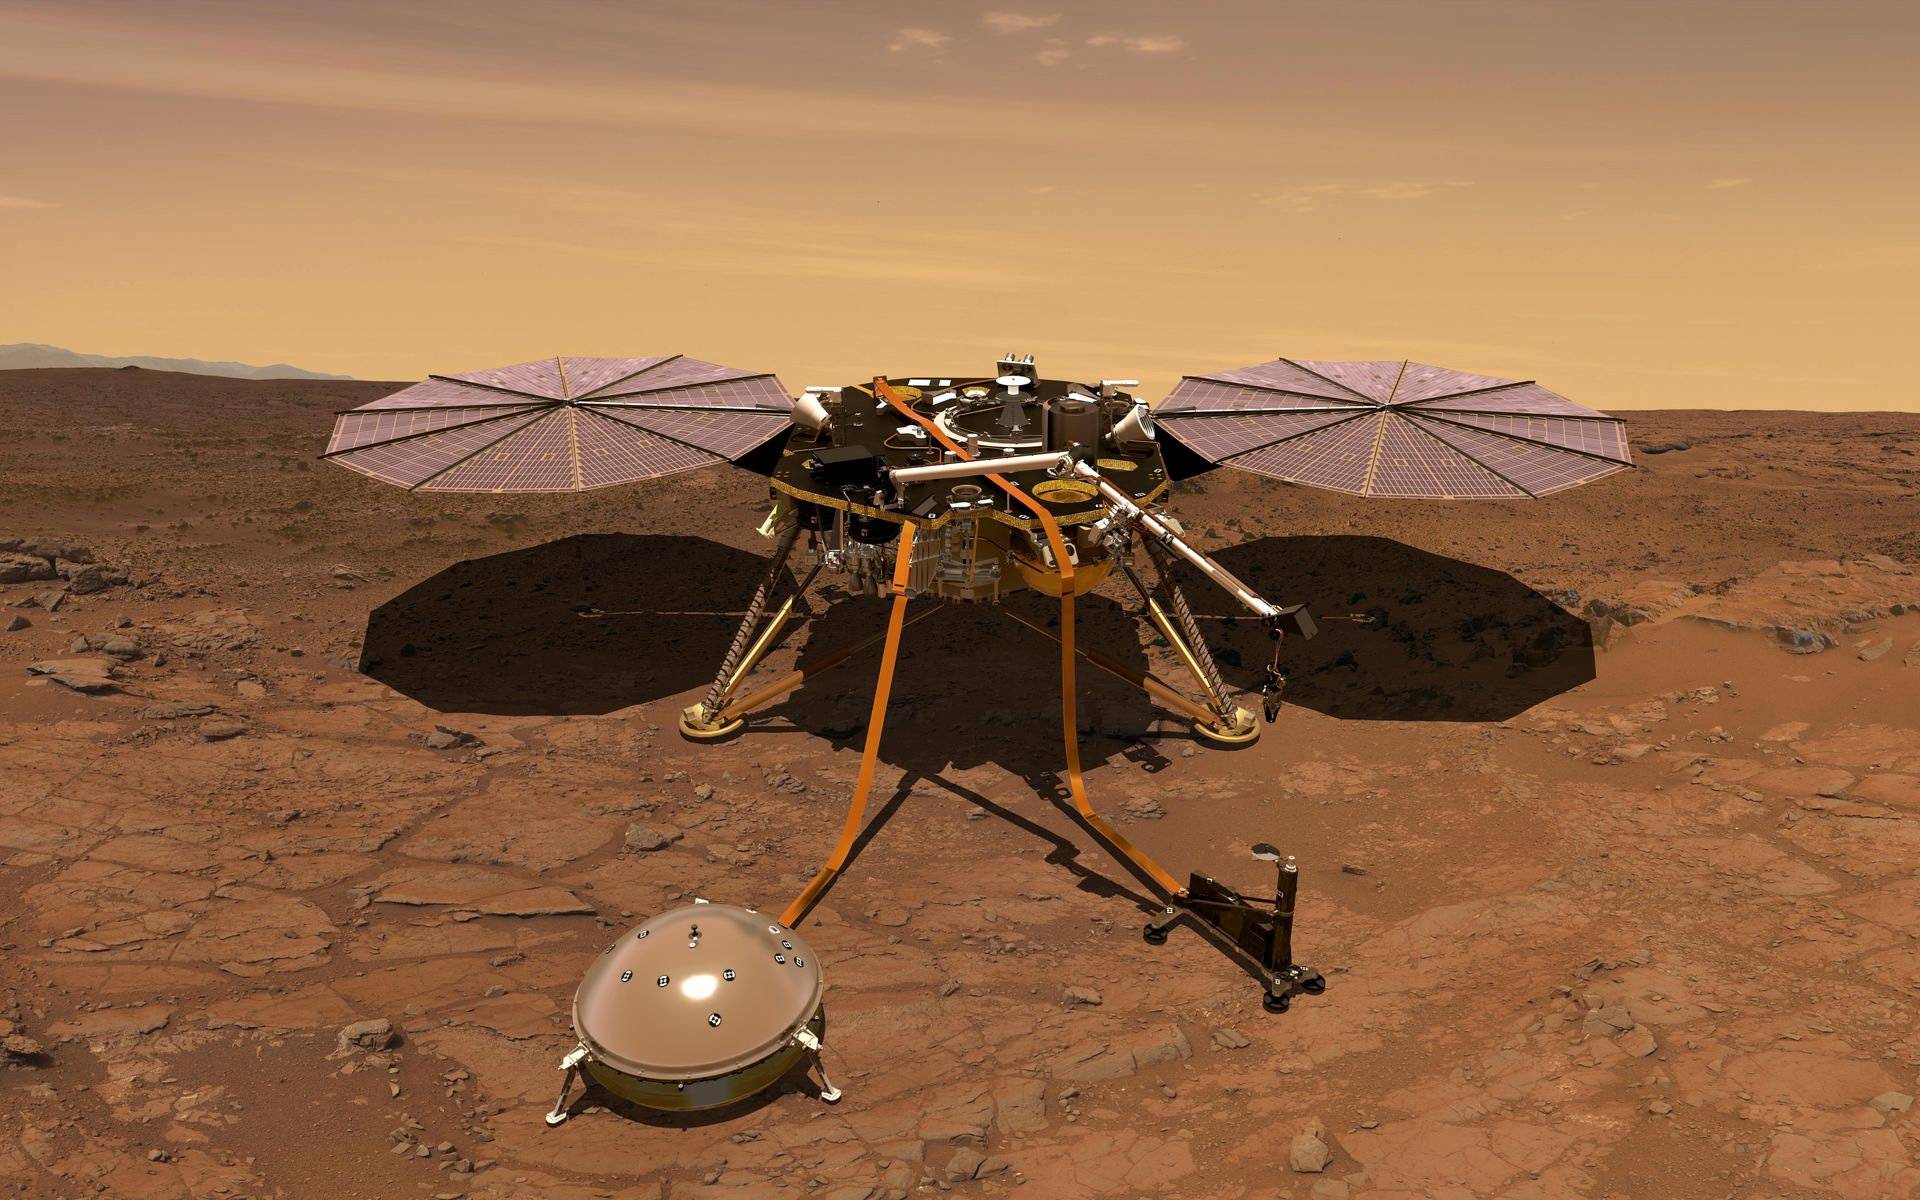 FILE PHOTO: The Mars InSight probe in artist's rendition operating on the surface of Mars due to lift off from Vandenberg Air Force Base